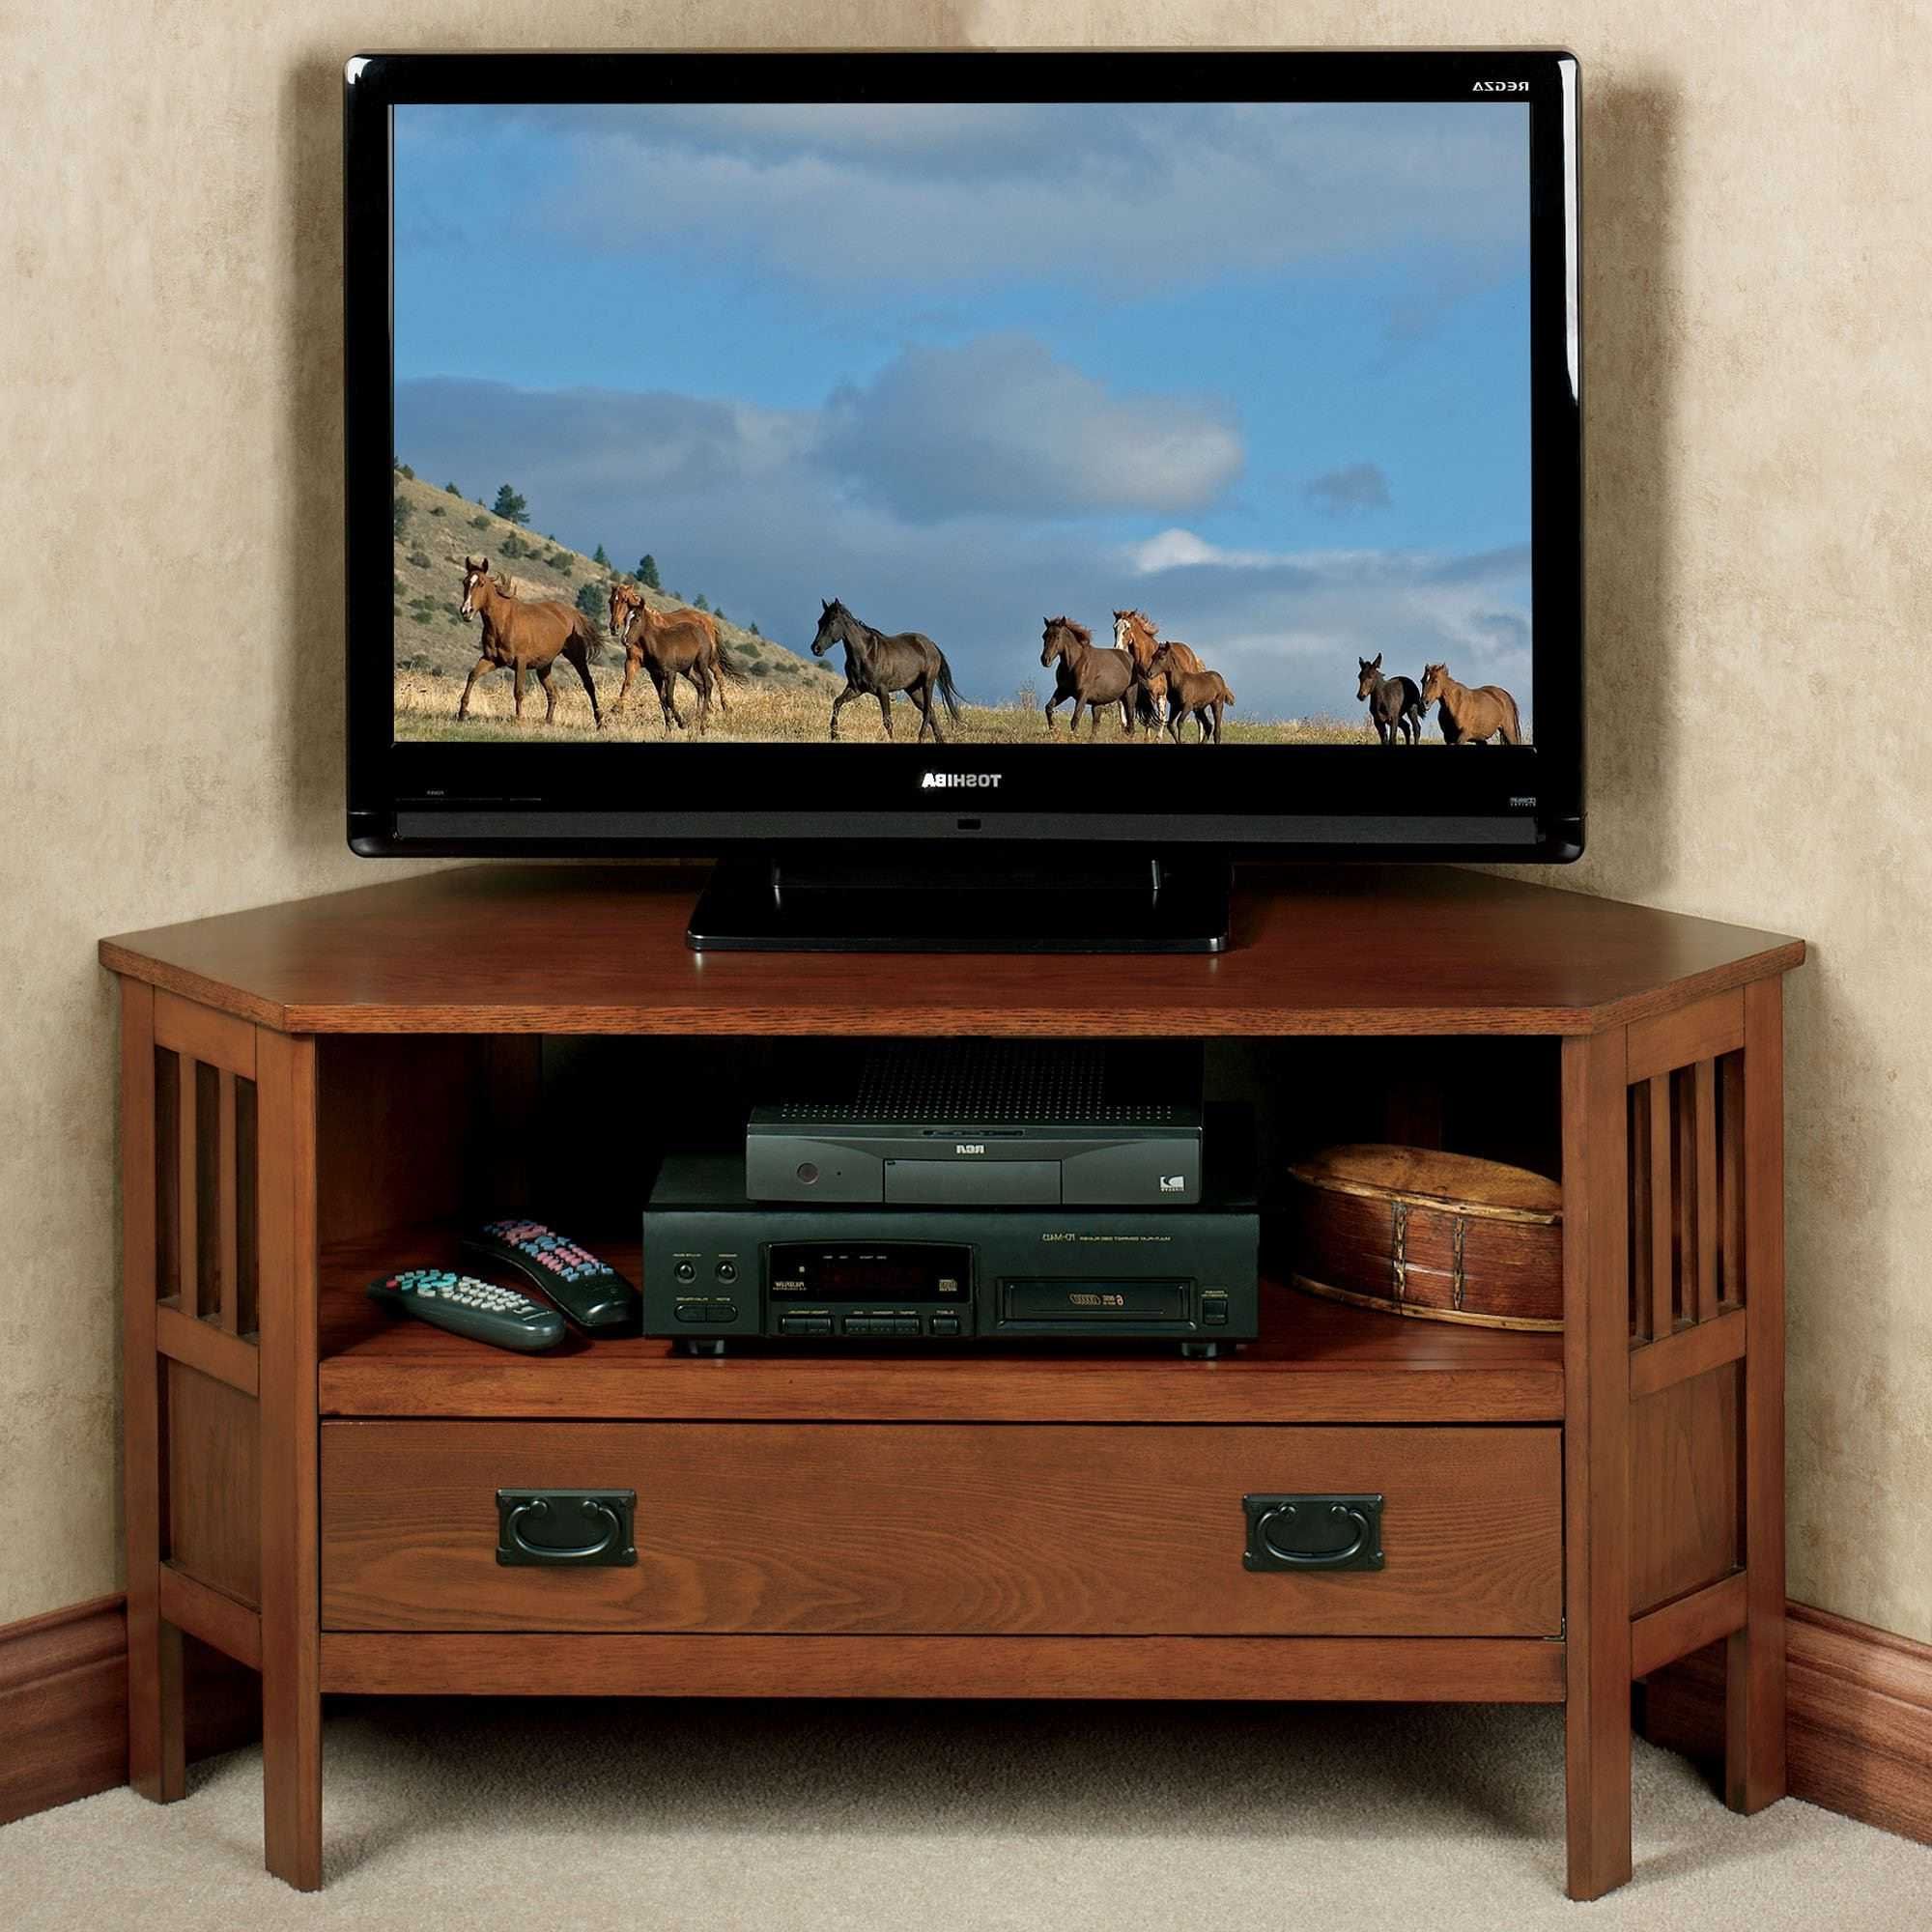 Corner Tv Stand Amazon Tall For 60 Inch 55 Stands With Mount Drawers With Regard To Most Current Corner Tv Stands For 60 Inch Flat Screens (View 4 of 20)